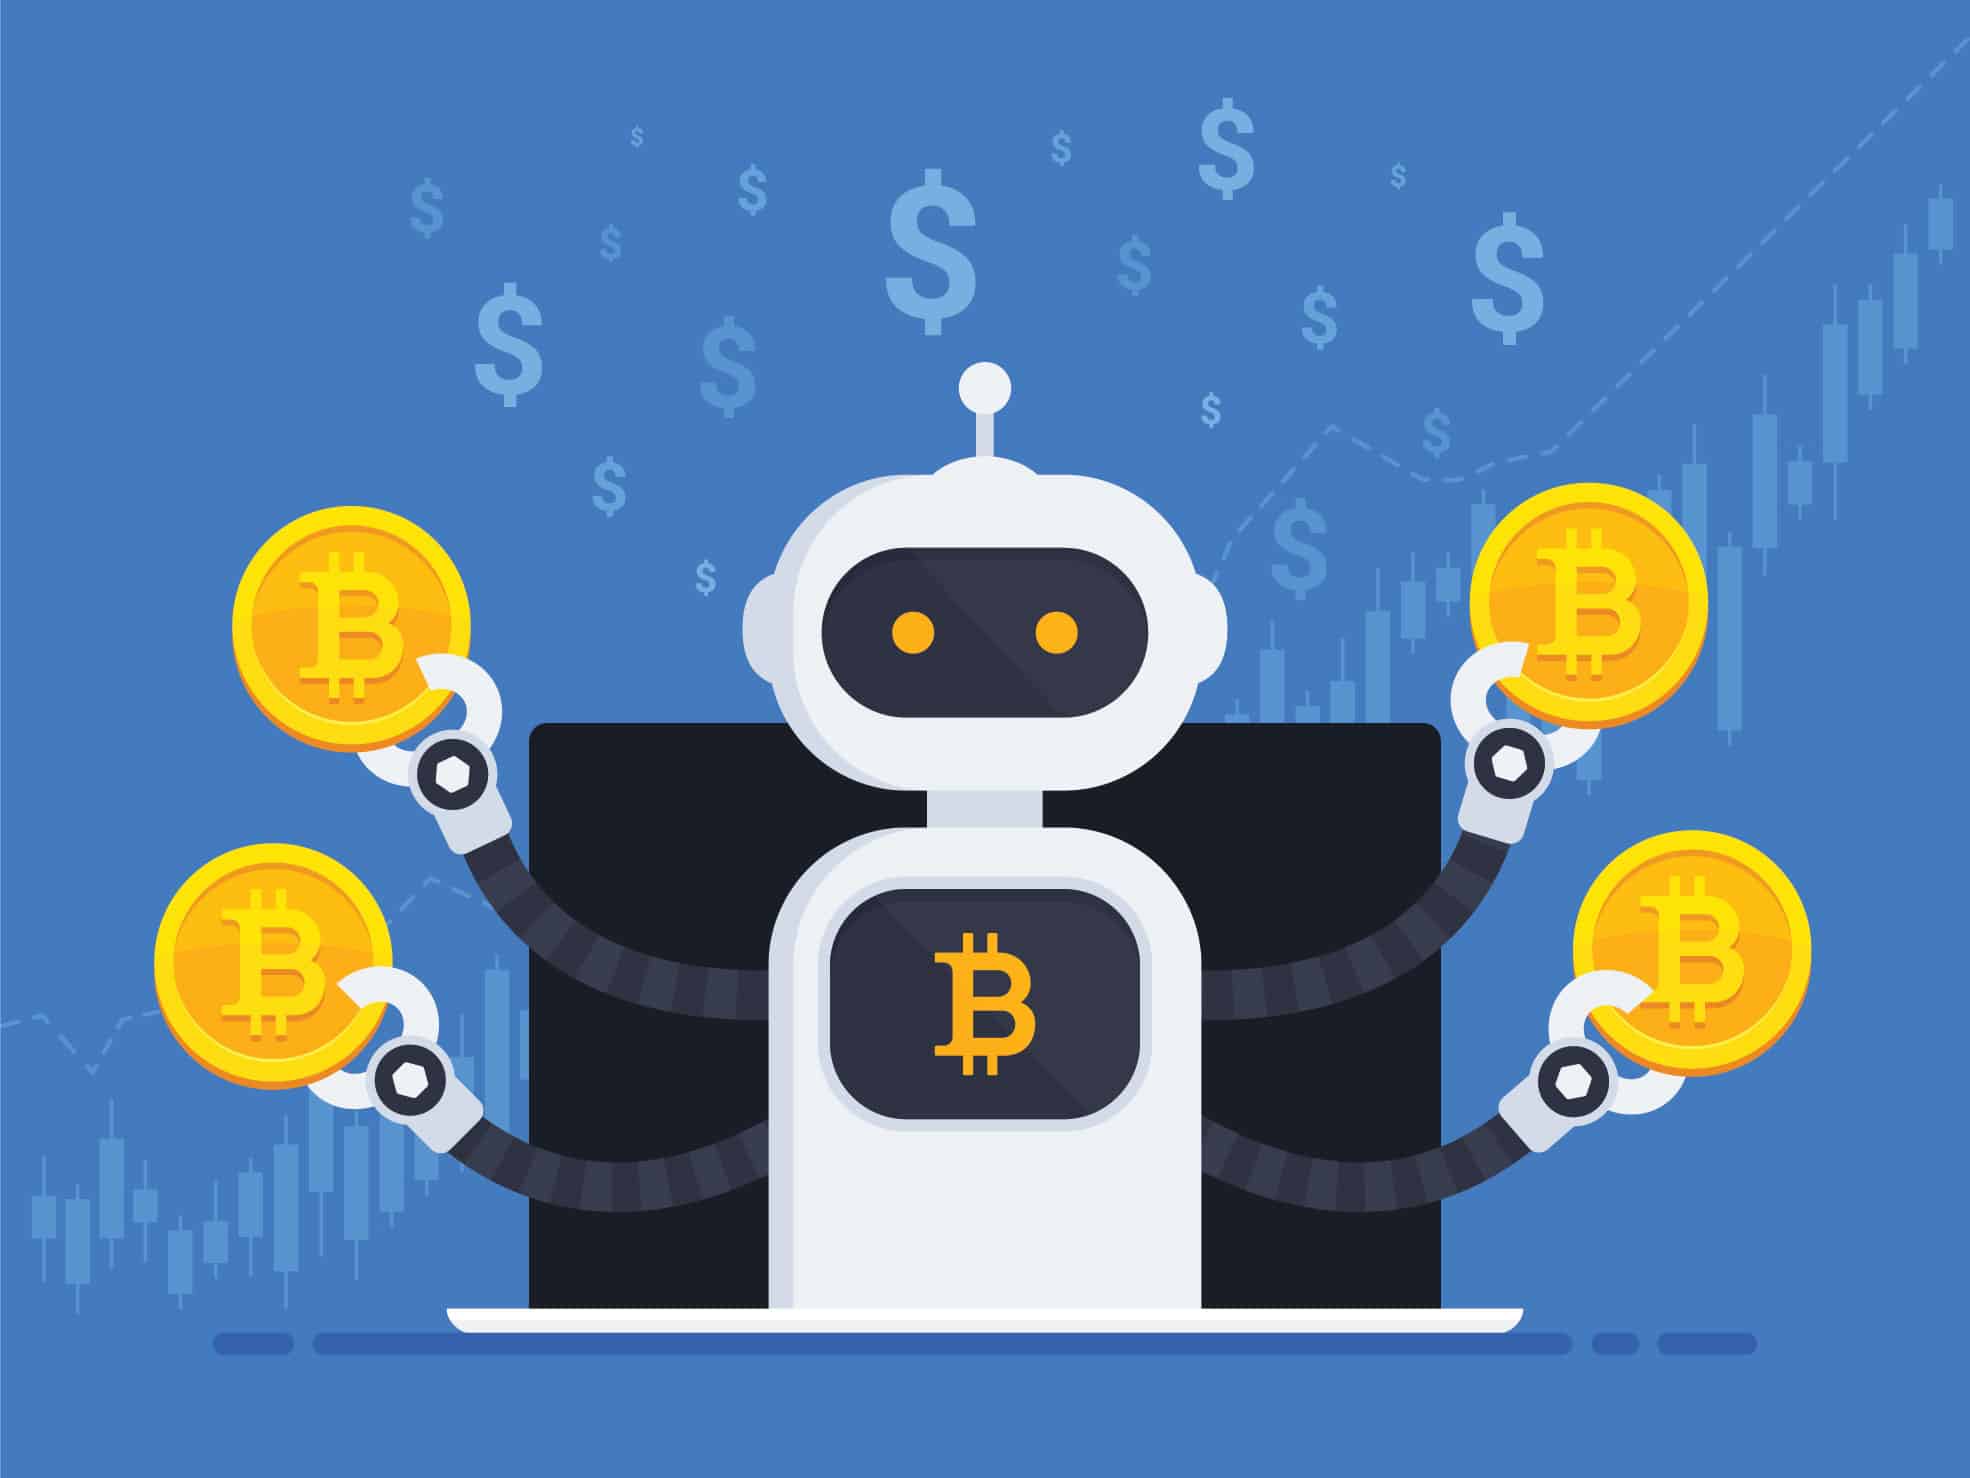 Beware of “OTP” bots that can steal all your cryptocurrency thumbnail